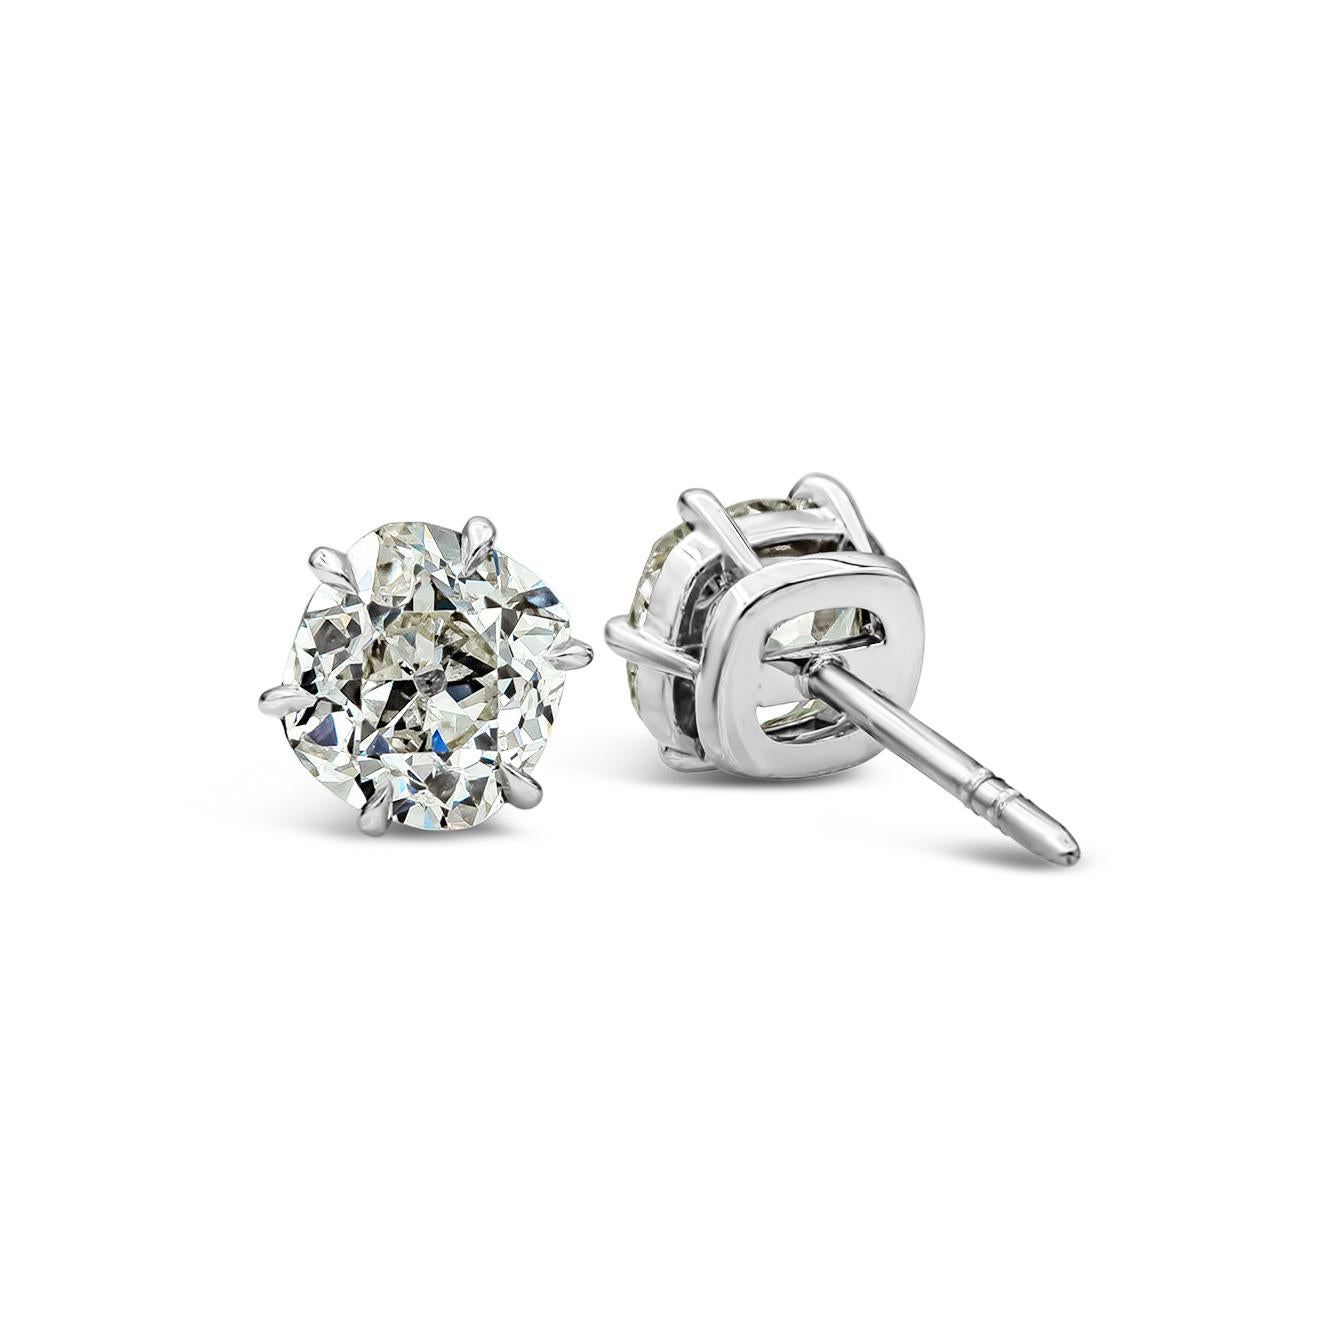 A unique pair of stud earrings showcasing two antique old mine cut diamonds weighing 2.31 carats total, I-J Color and SI2 in Clarity. Set in a six prong setting, Made in Platinum. 

Roman Malakov is a custom house, specializing in creating anything